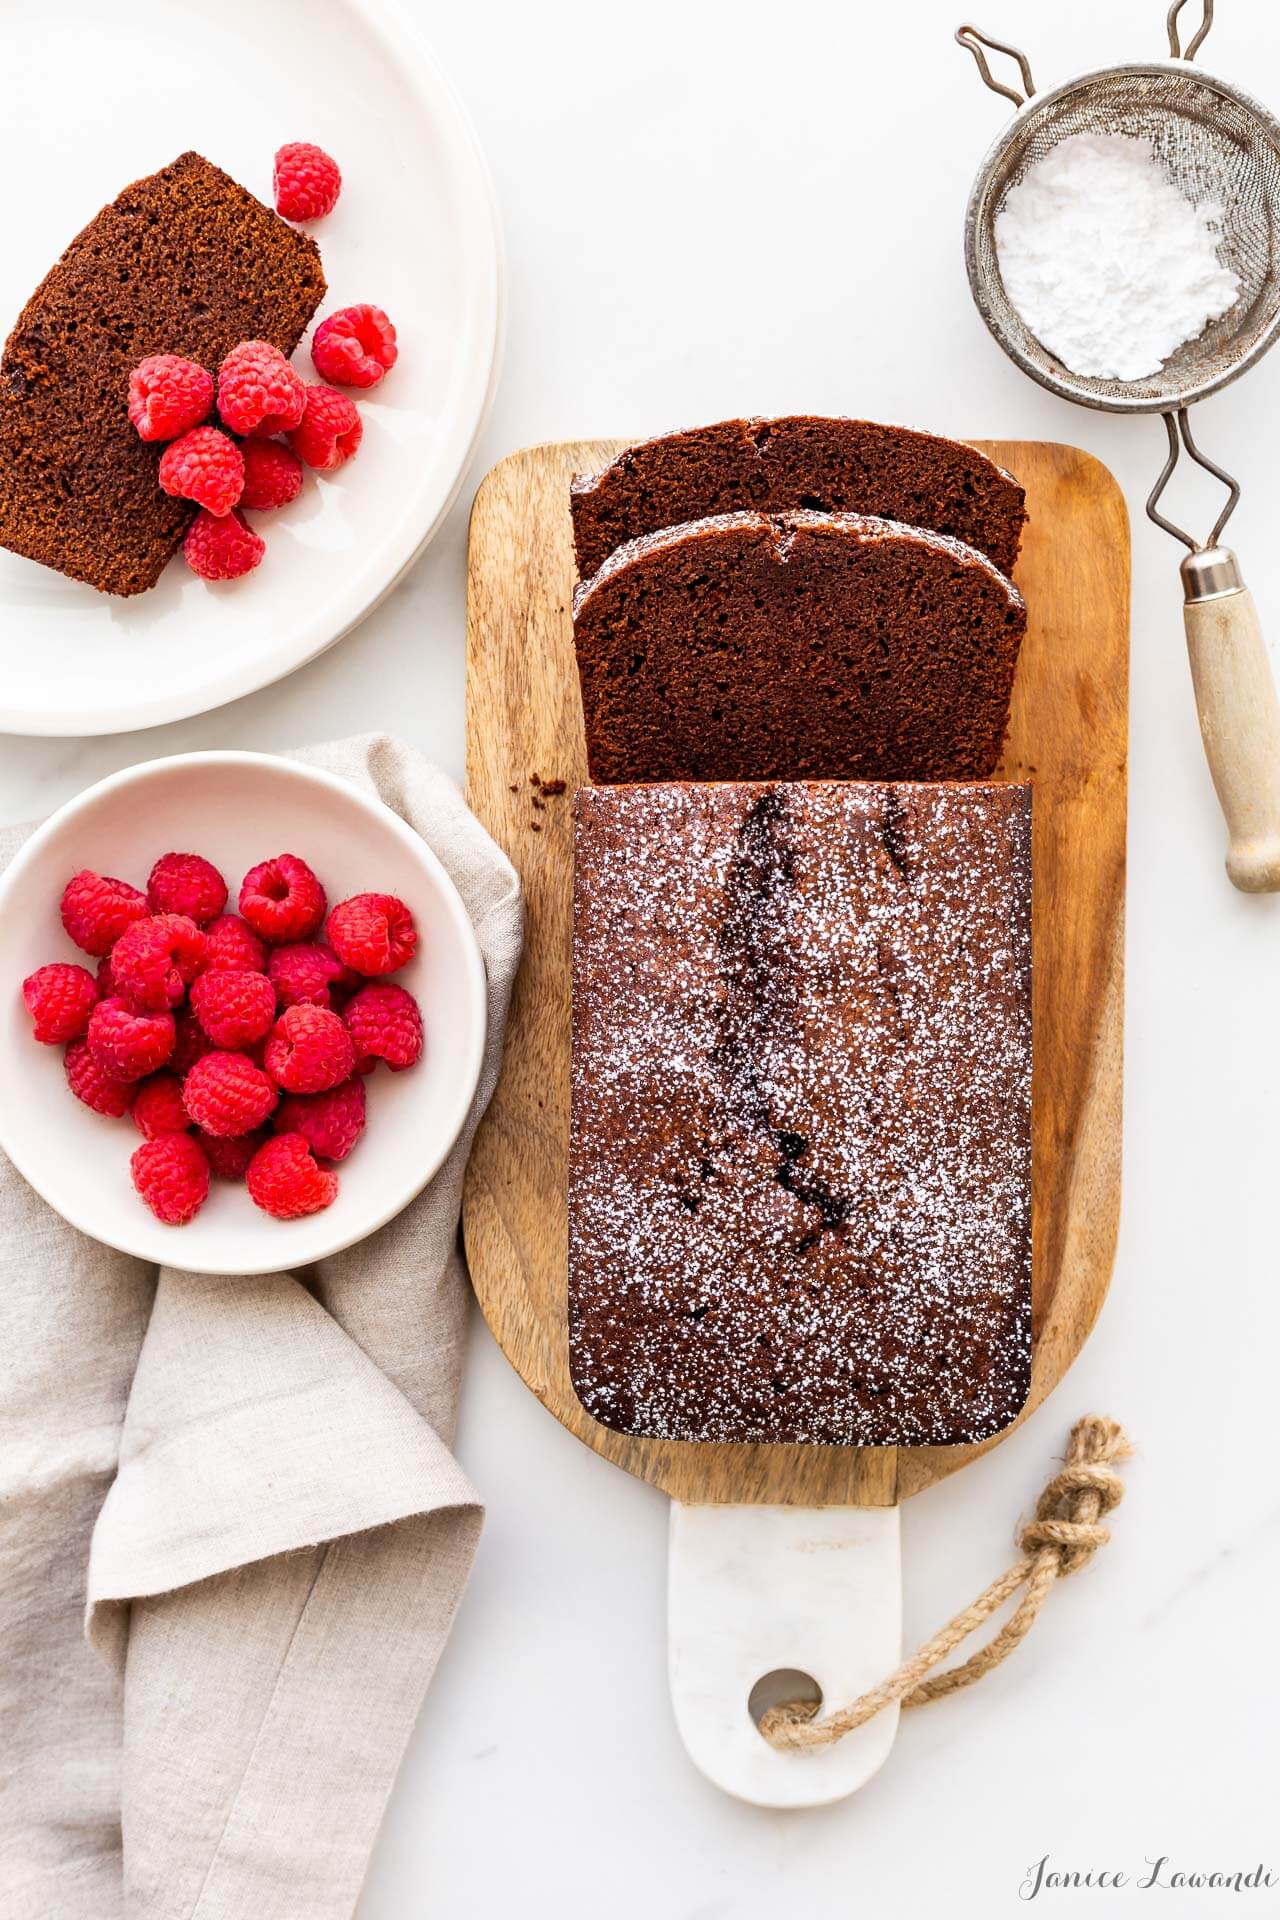 Slices of chocolate pound cake loaf cake flavoured with cinnamon and espresso, served on a cutting boards, slices topped with fresh raspberries